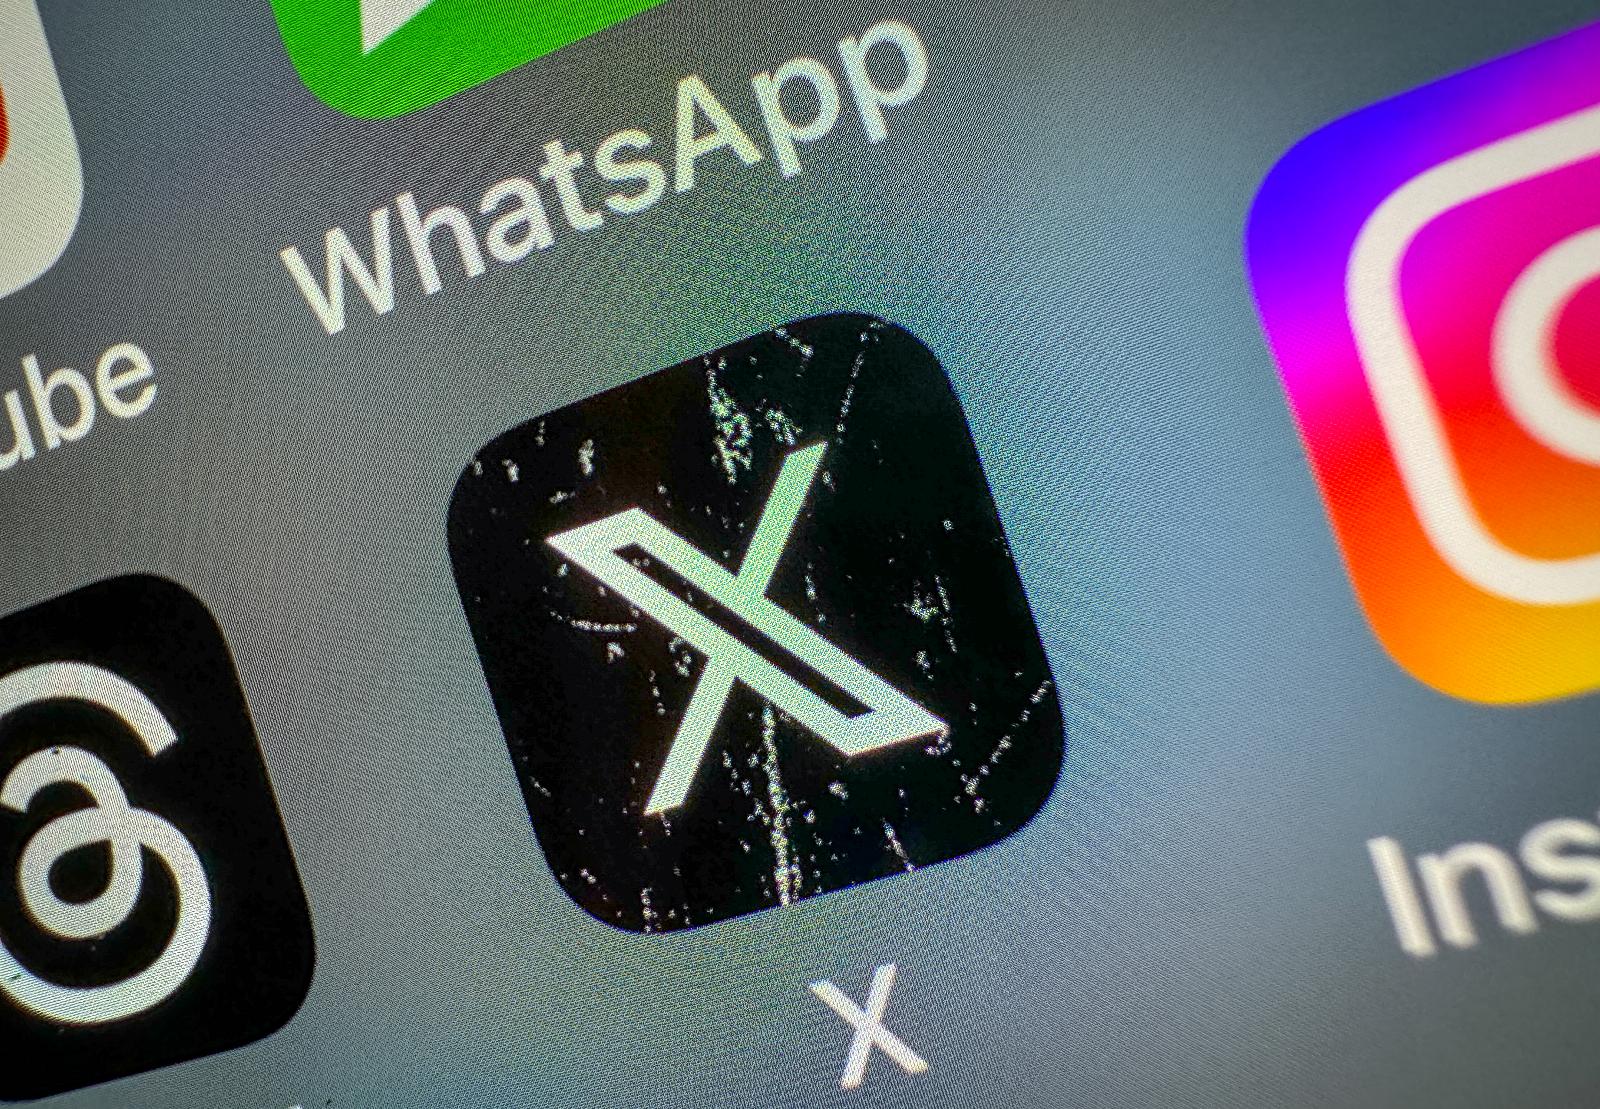 X adds support for passkeys on iOS after removing SMS 2FA support last year